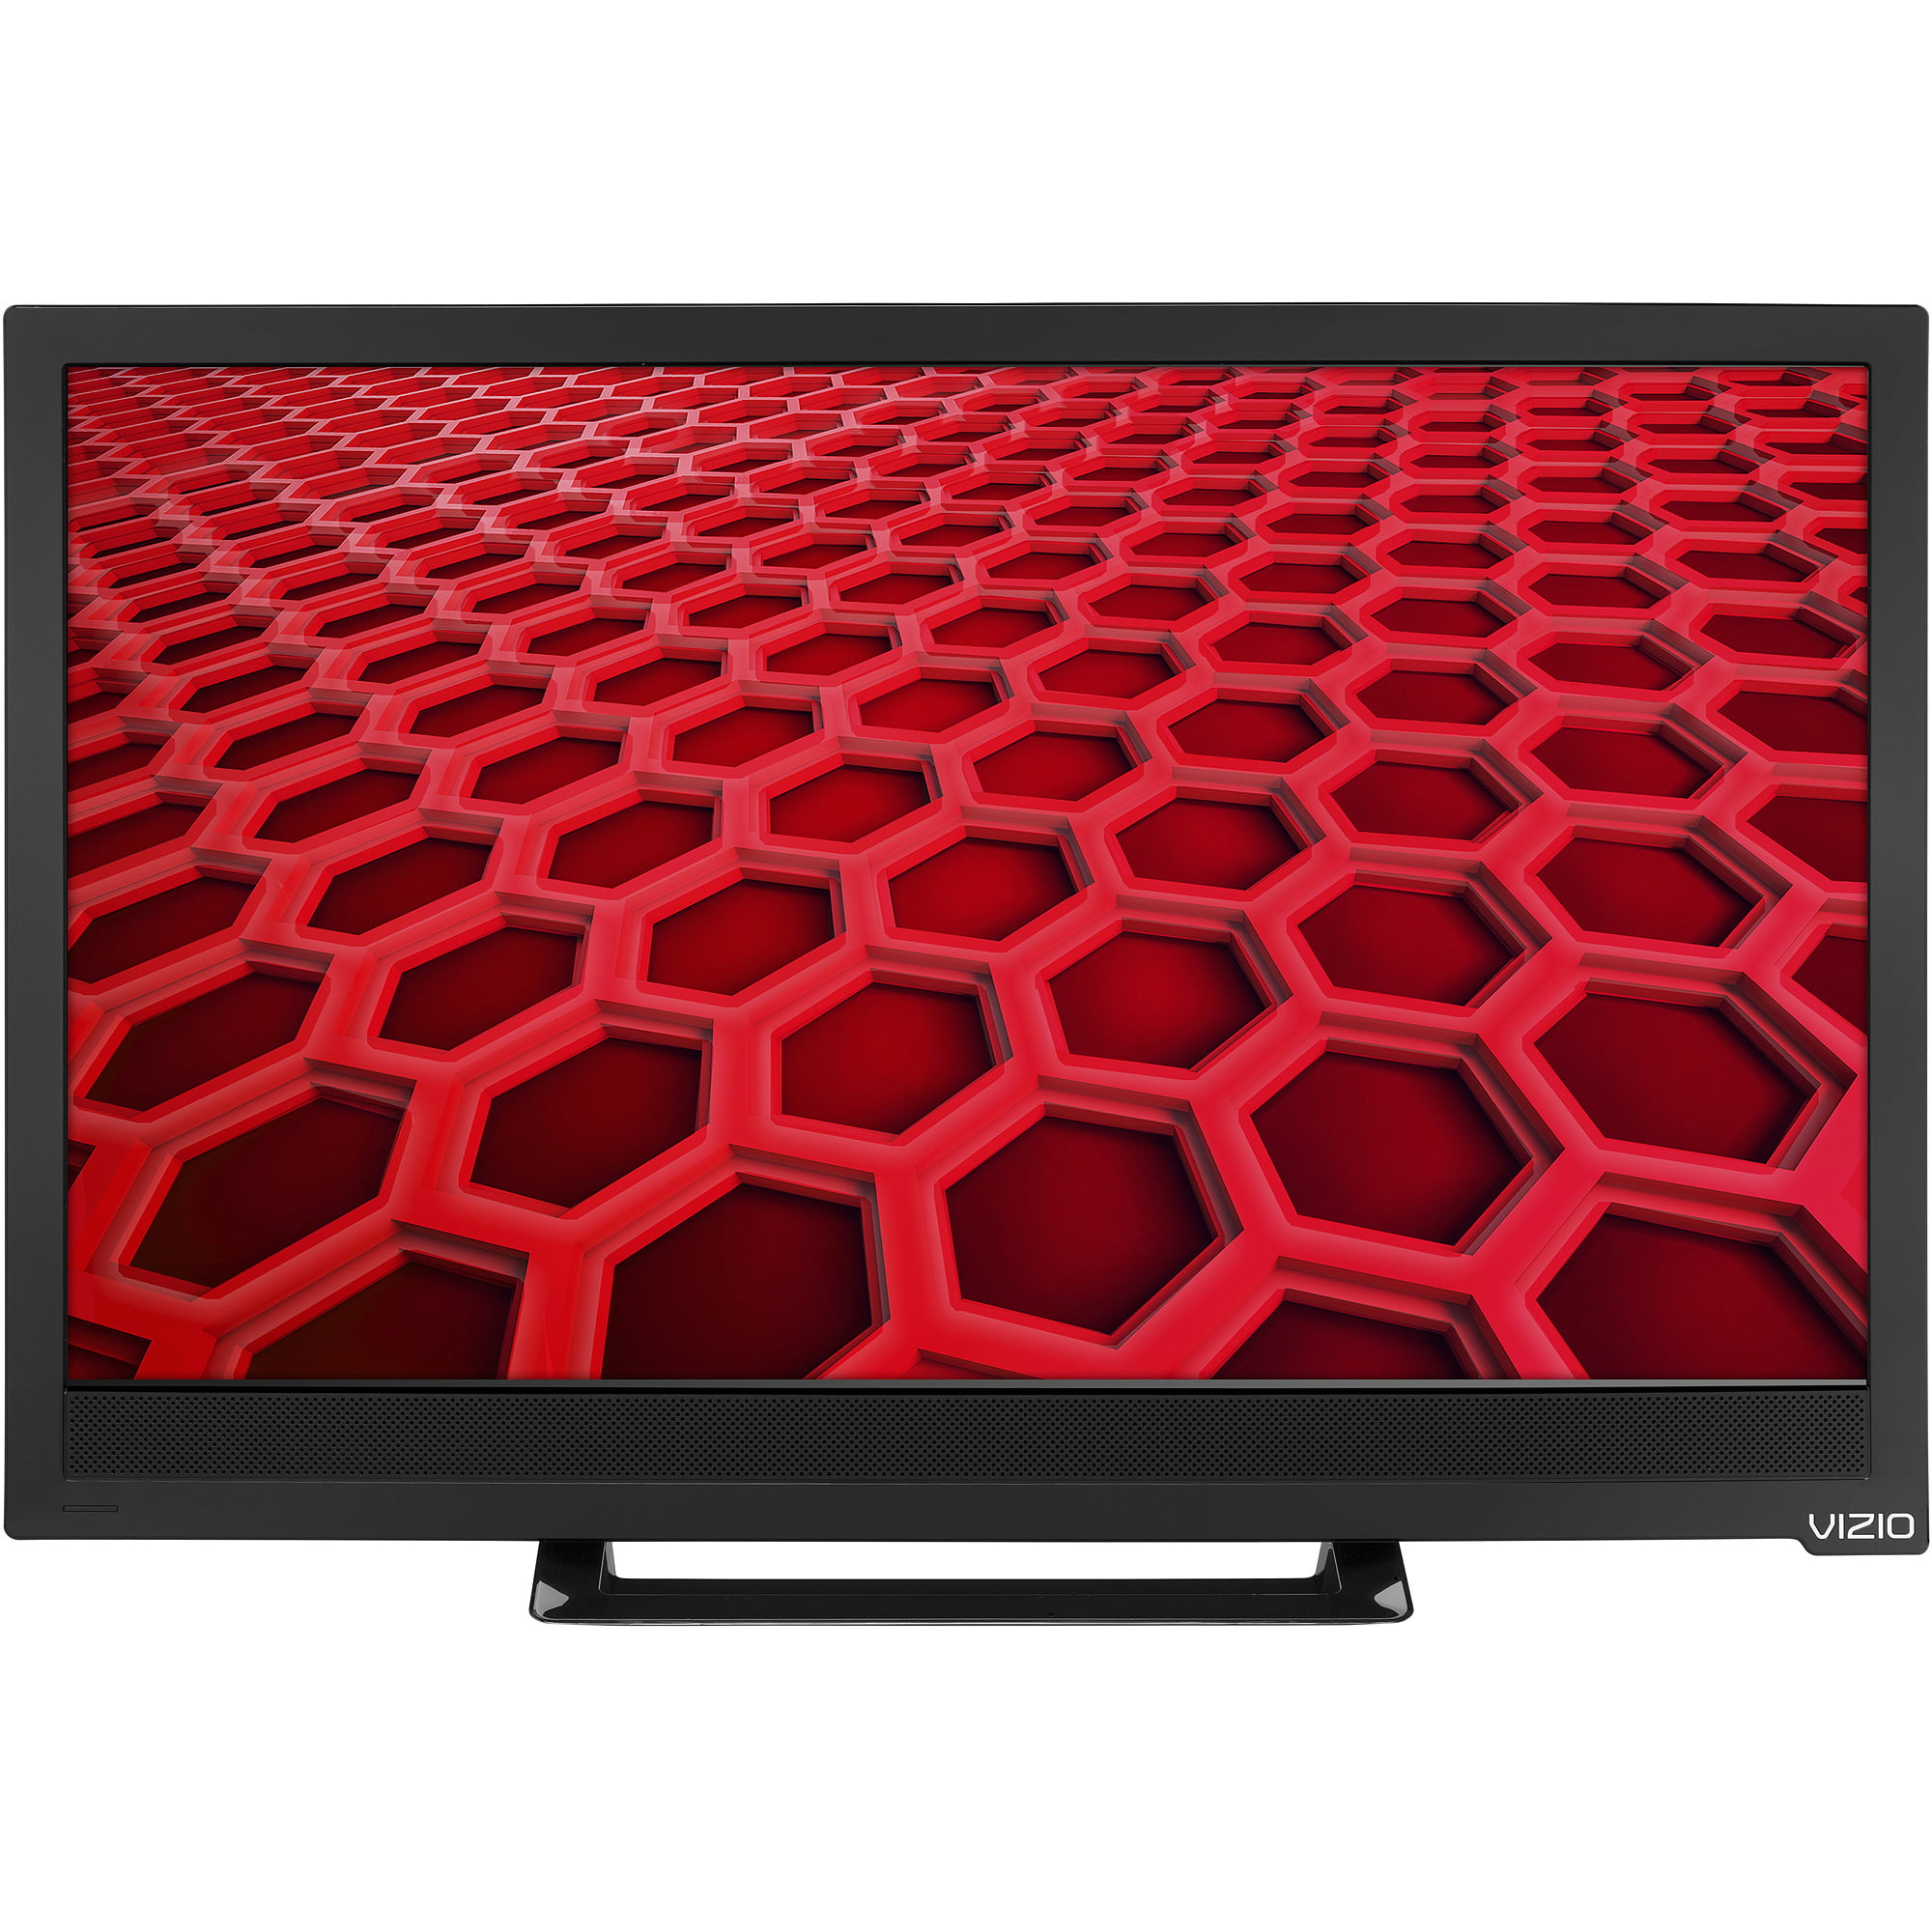 E243RV-FHD 23 LED TV Red Color Series HDTV